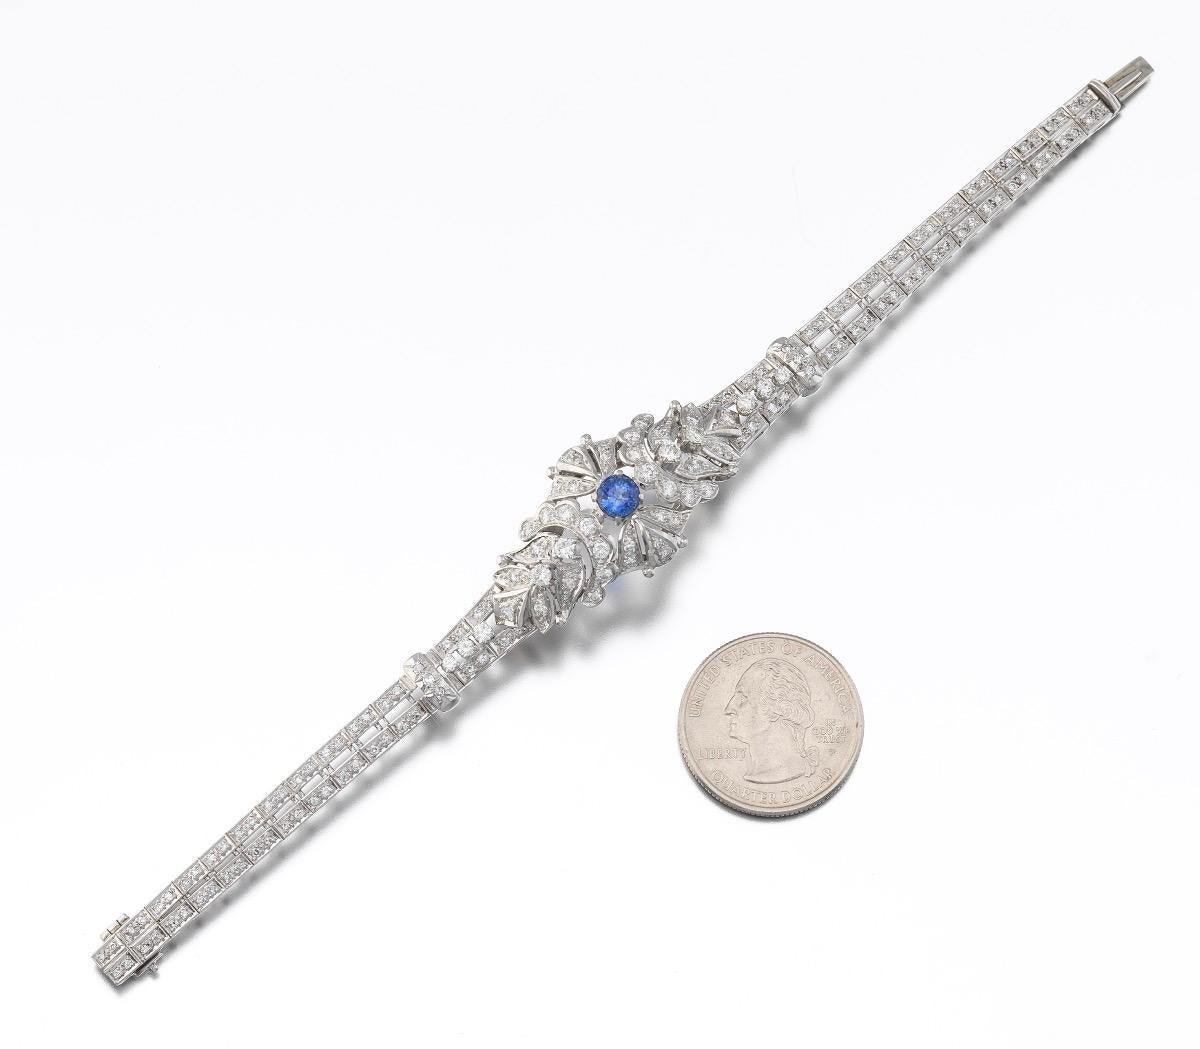 Gorgeous Art Deco platinum retro style bracelet with slide-in clasp and safety catch; set with central round cut natural blue sapphire, estimated weight 1.02 carats, and further accented with 157 round brilliant and single cut diamonds, total